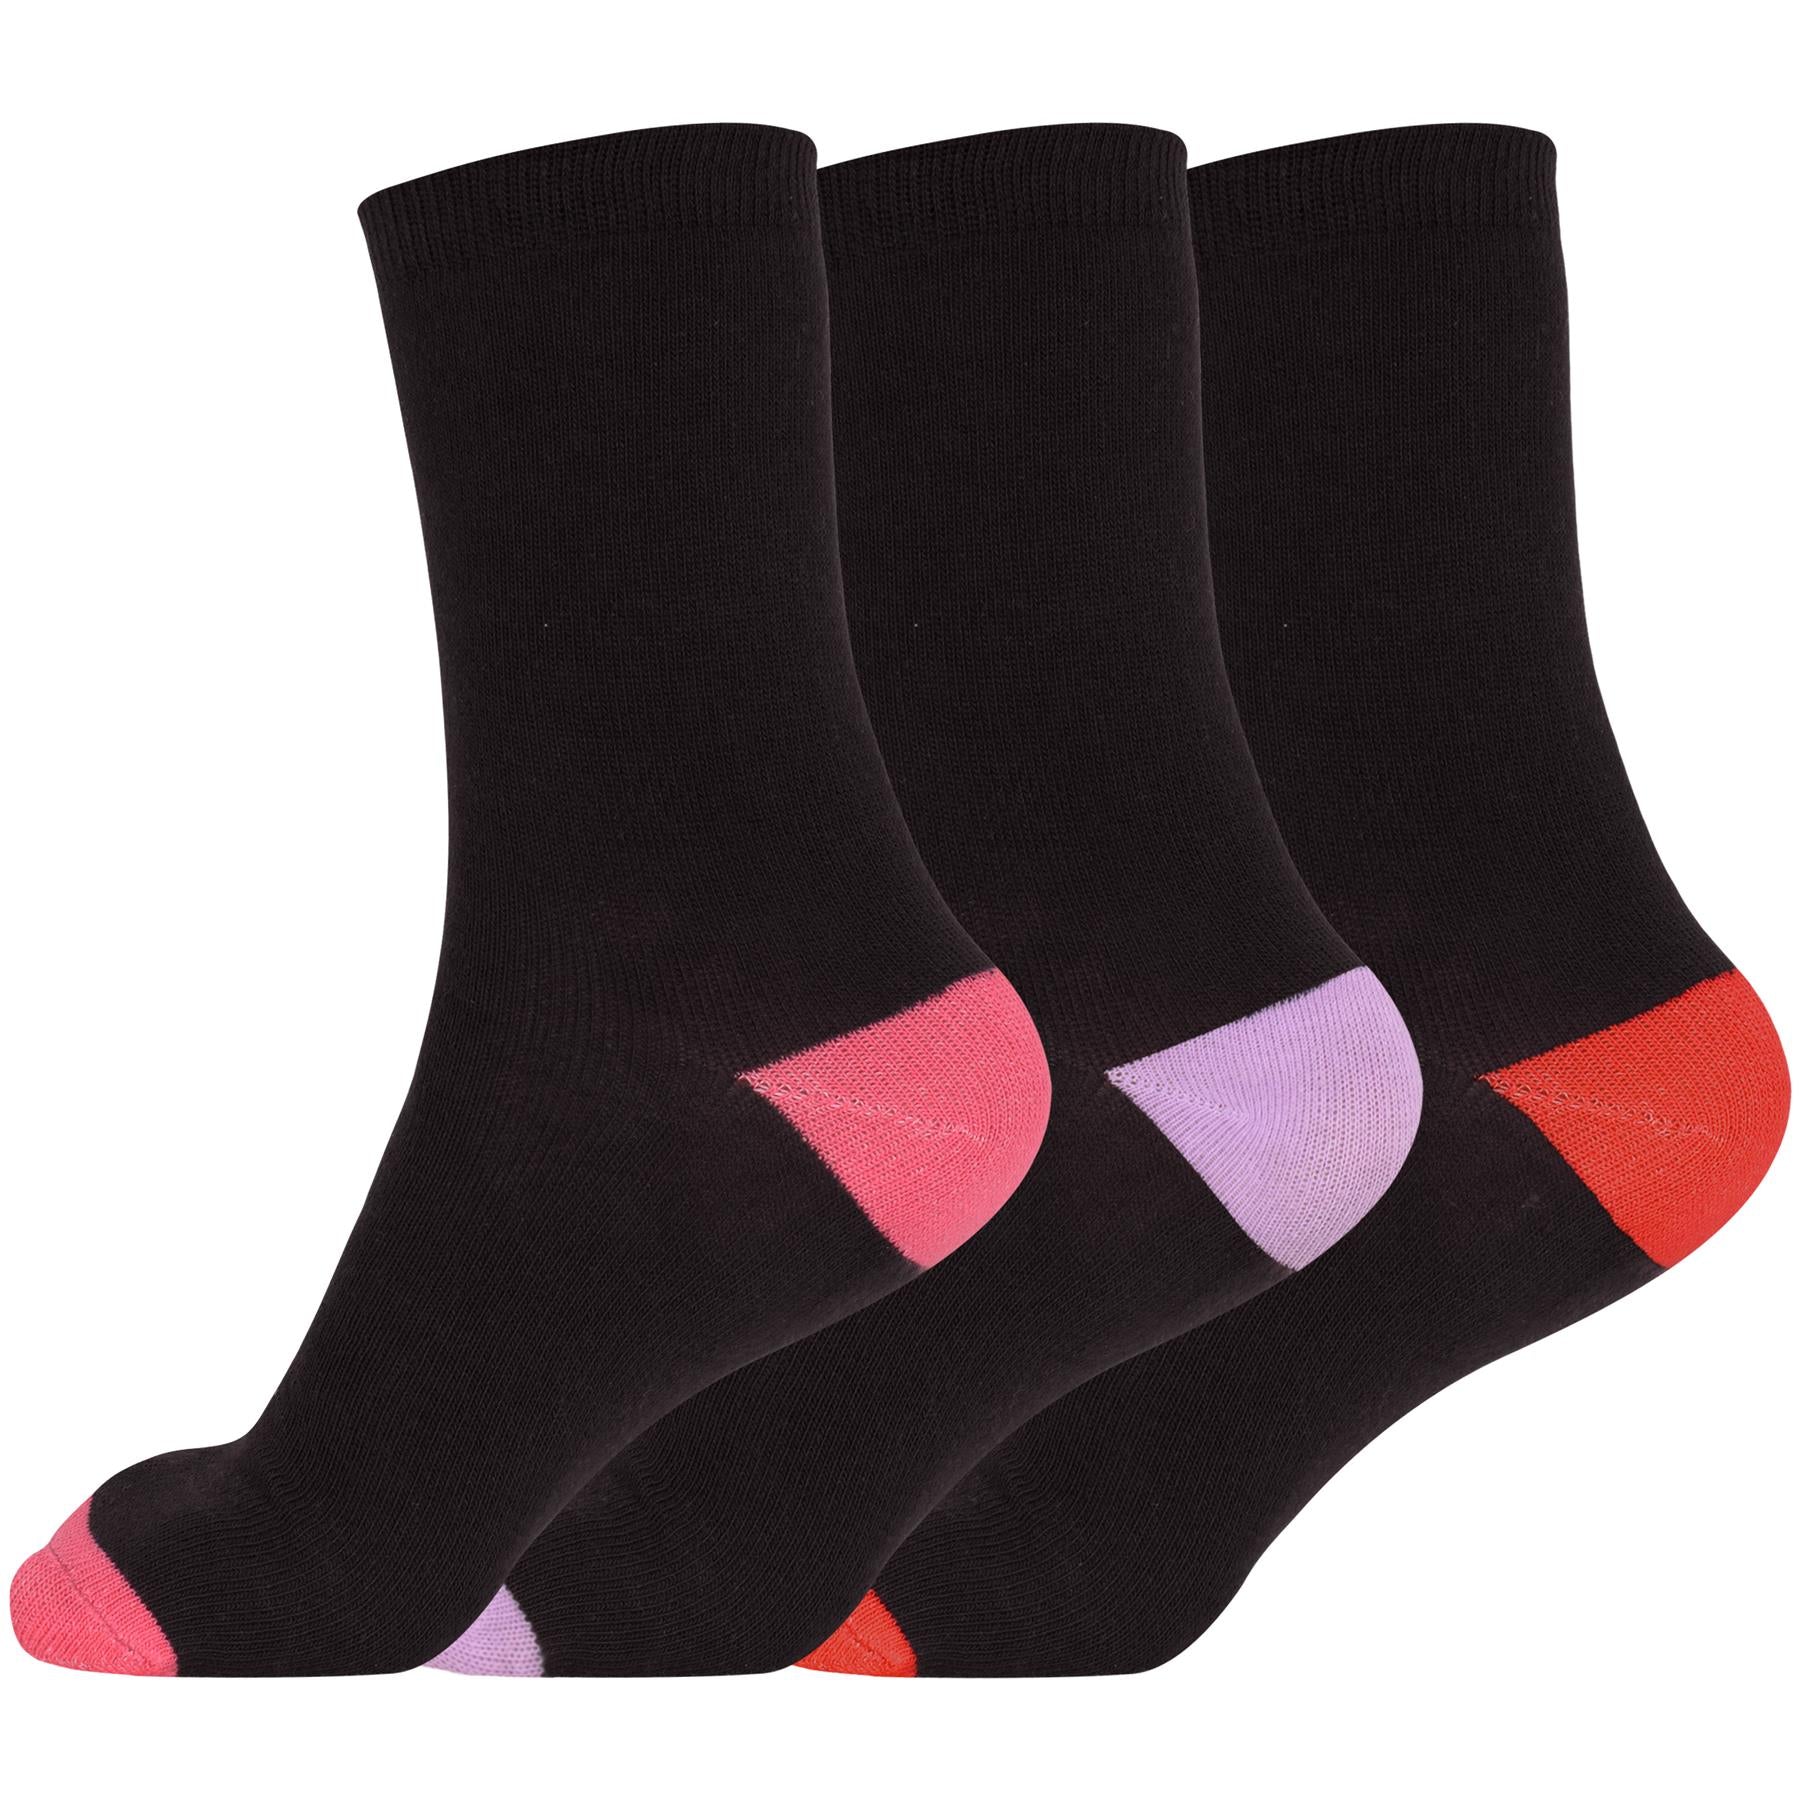 Ladies Cotton Rich Plain Ankle Socks Pack Of 5 and 3 Luxurious Ladies Socks